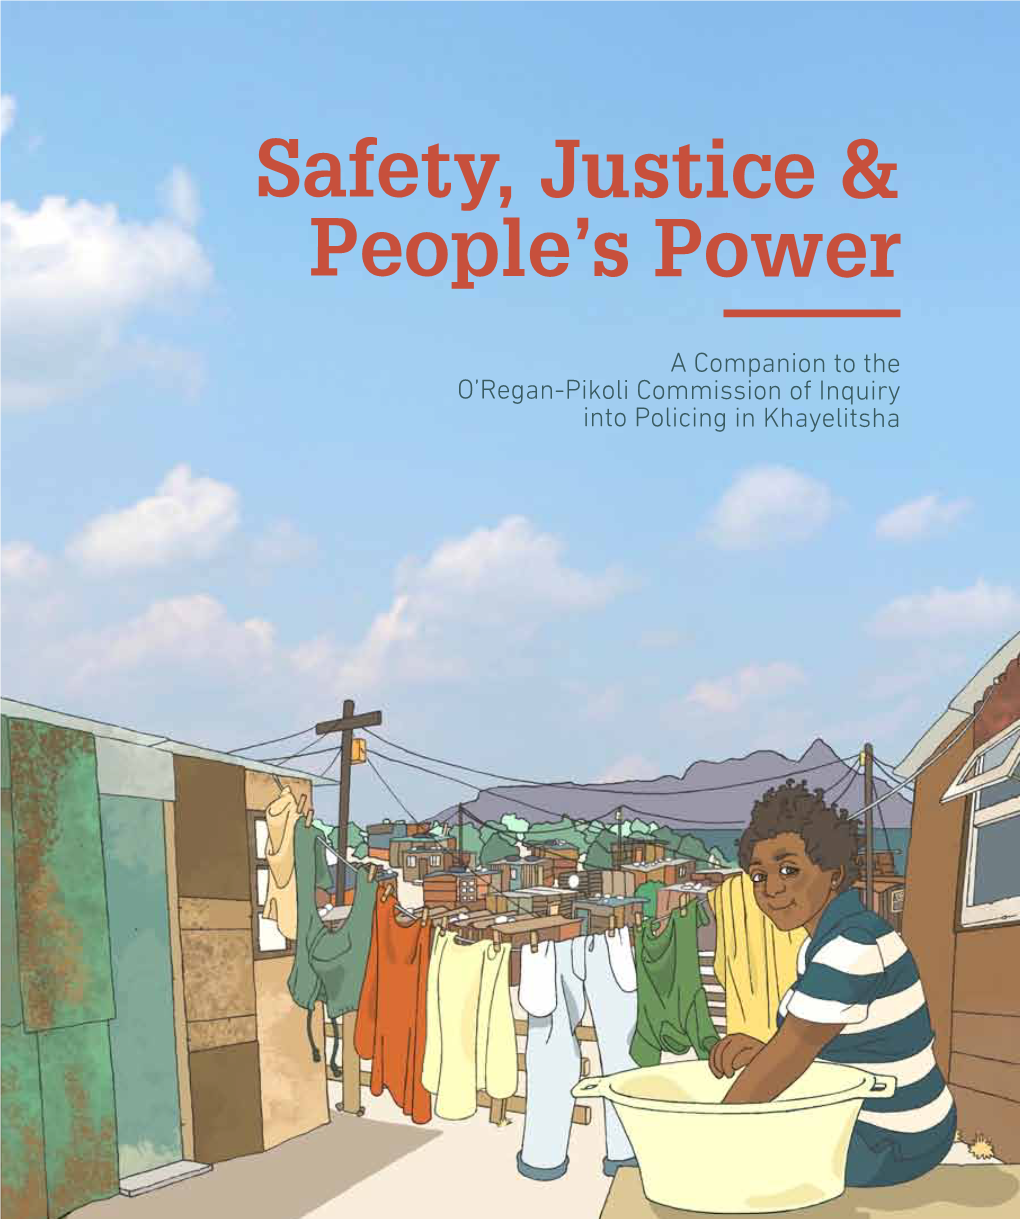 Safety, Justice & People's Power